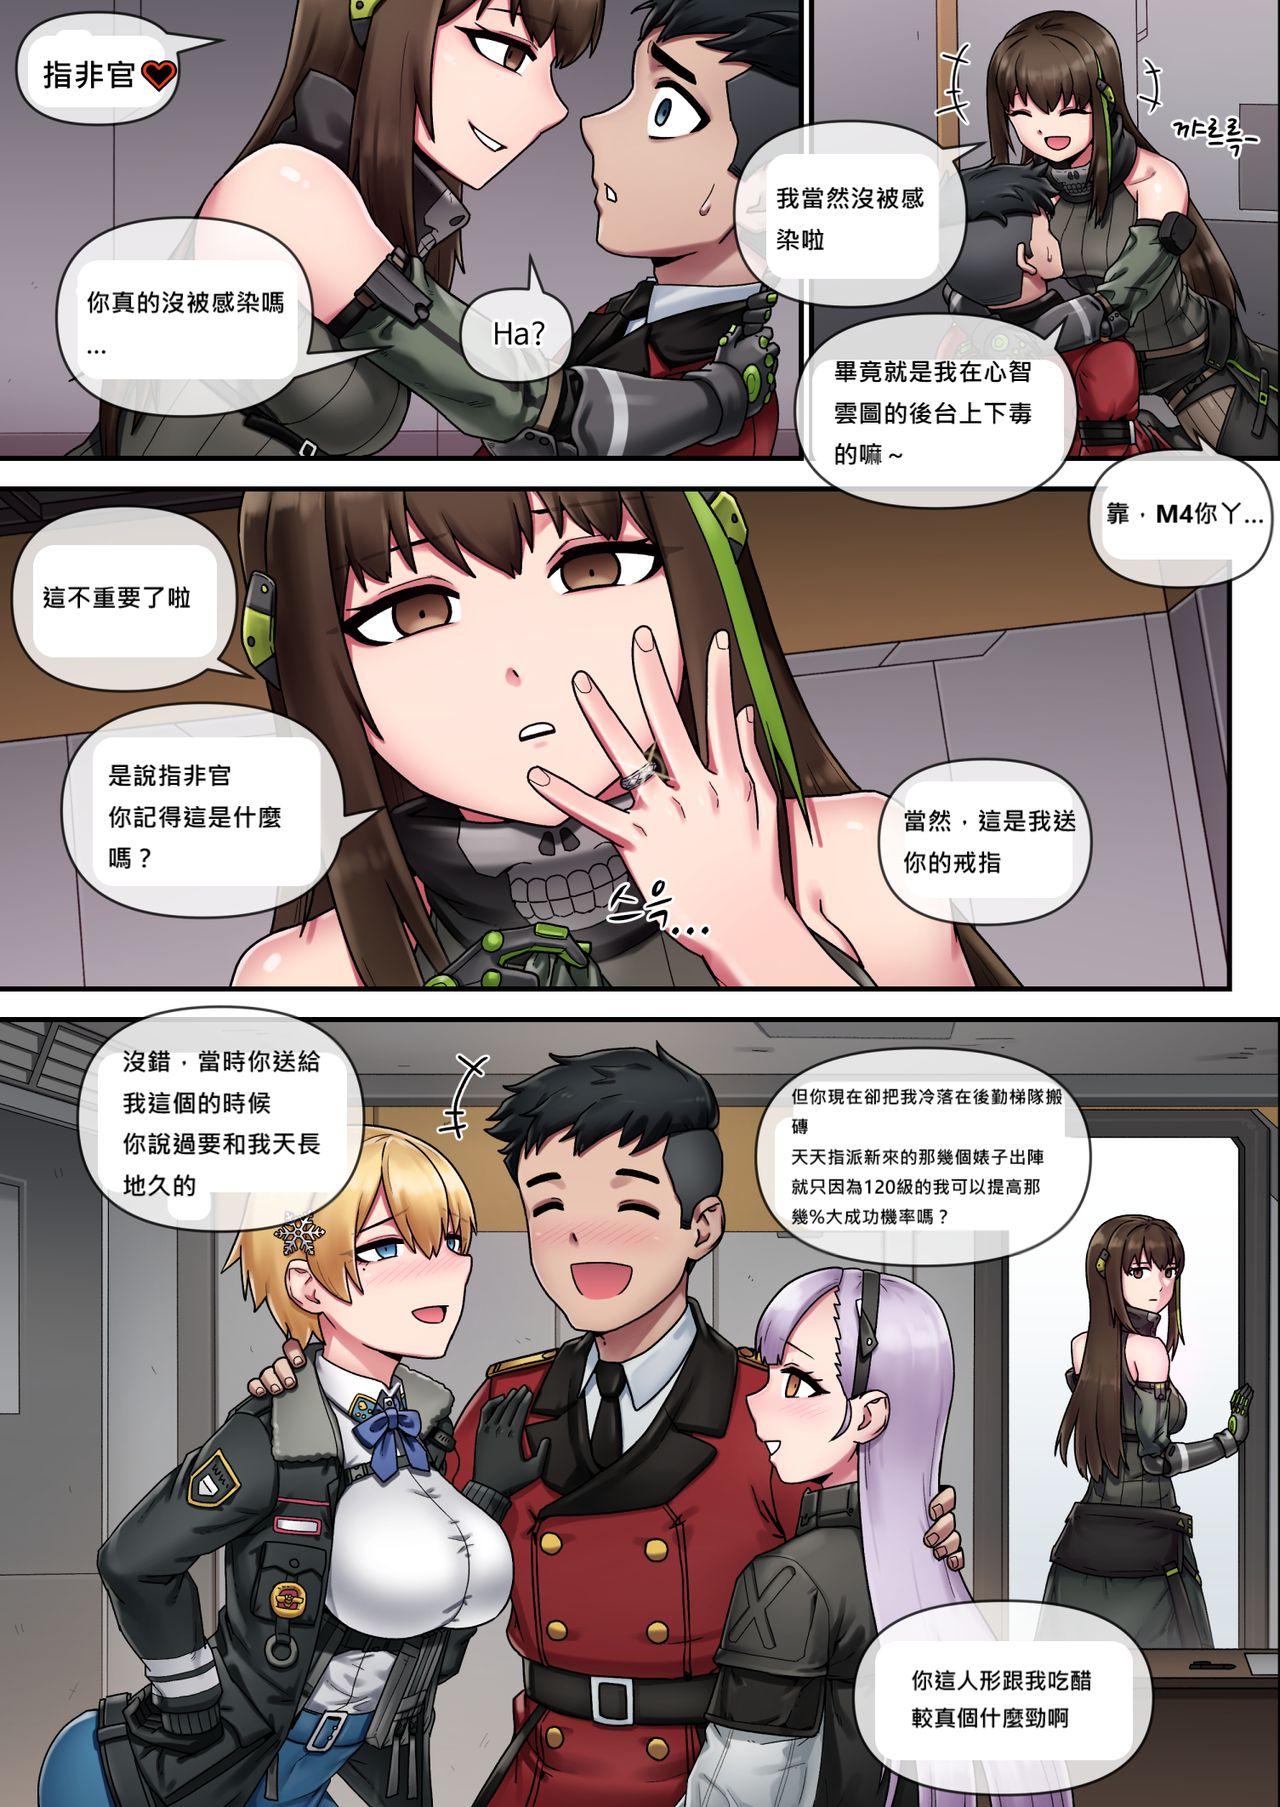 Lez Fuck My Only Princess - Girls frontline Africa - Page 8